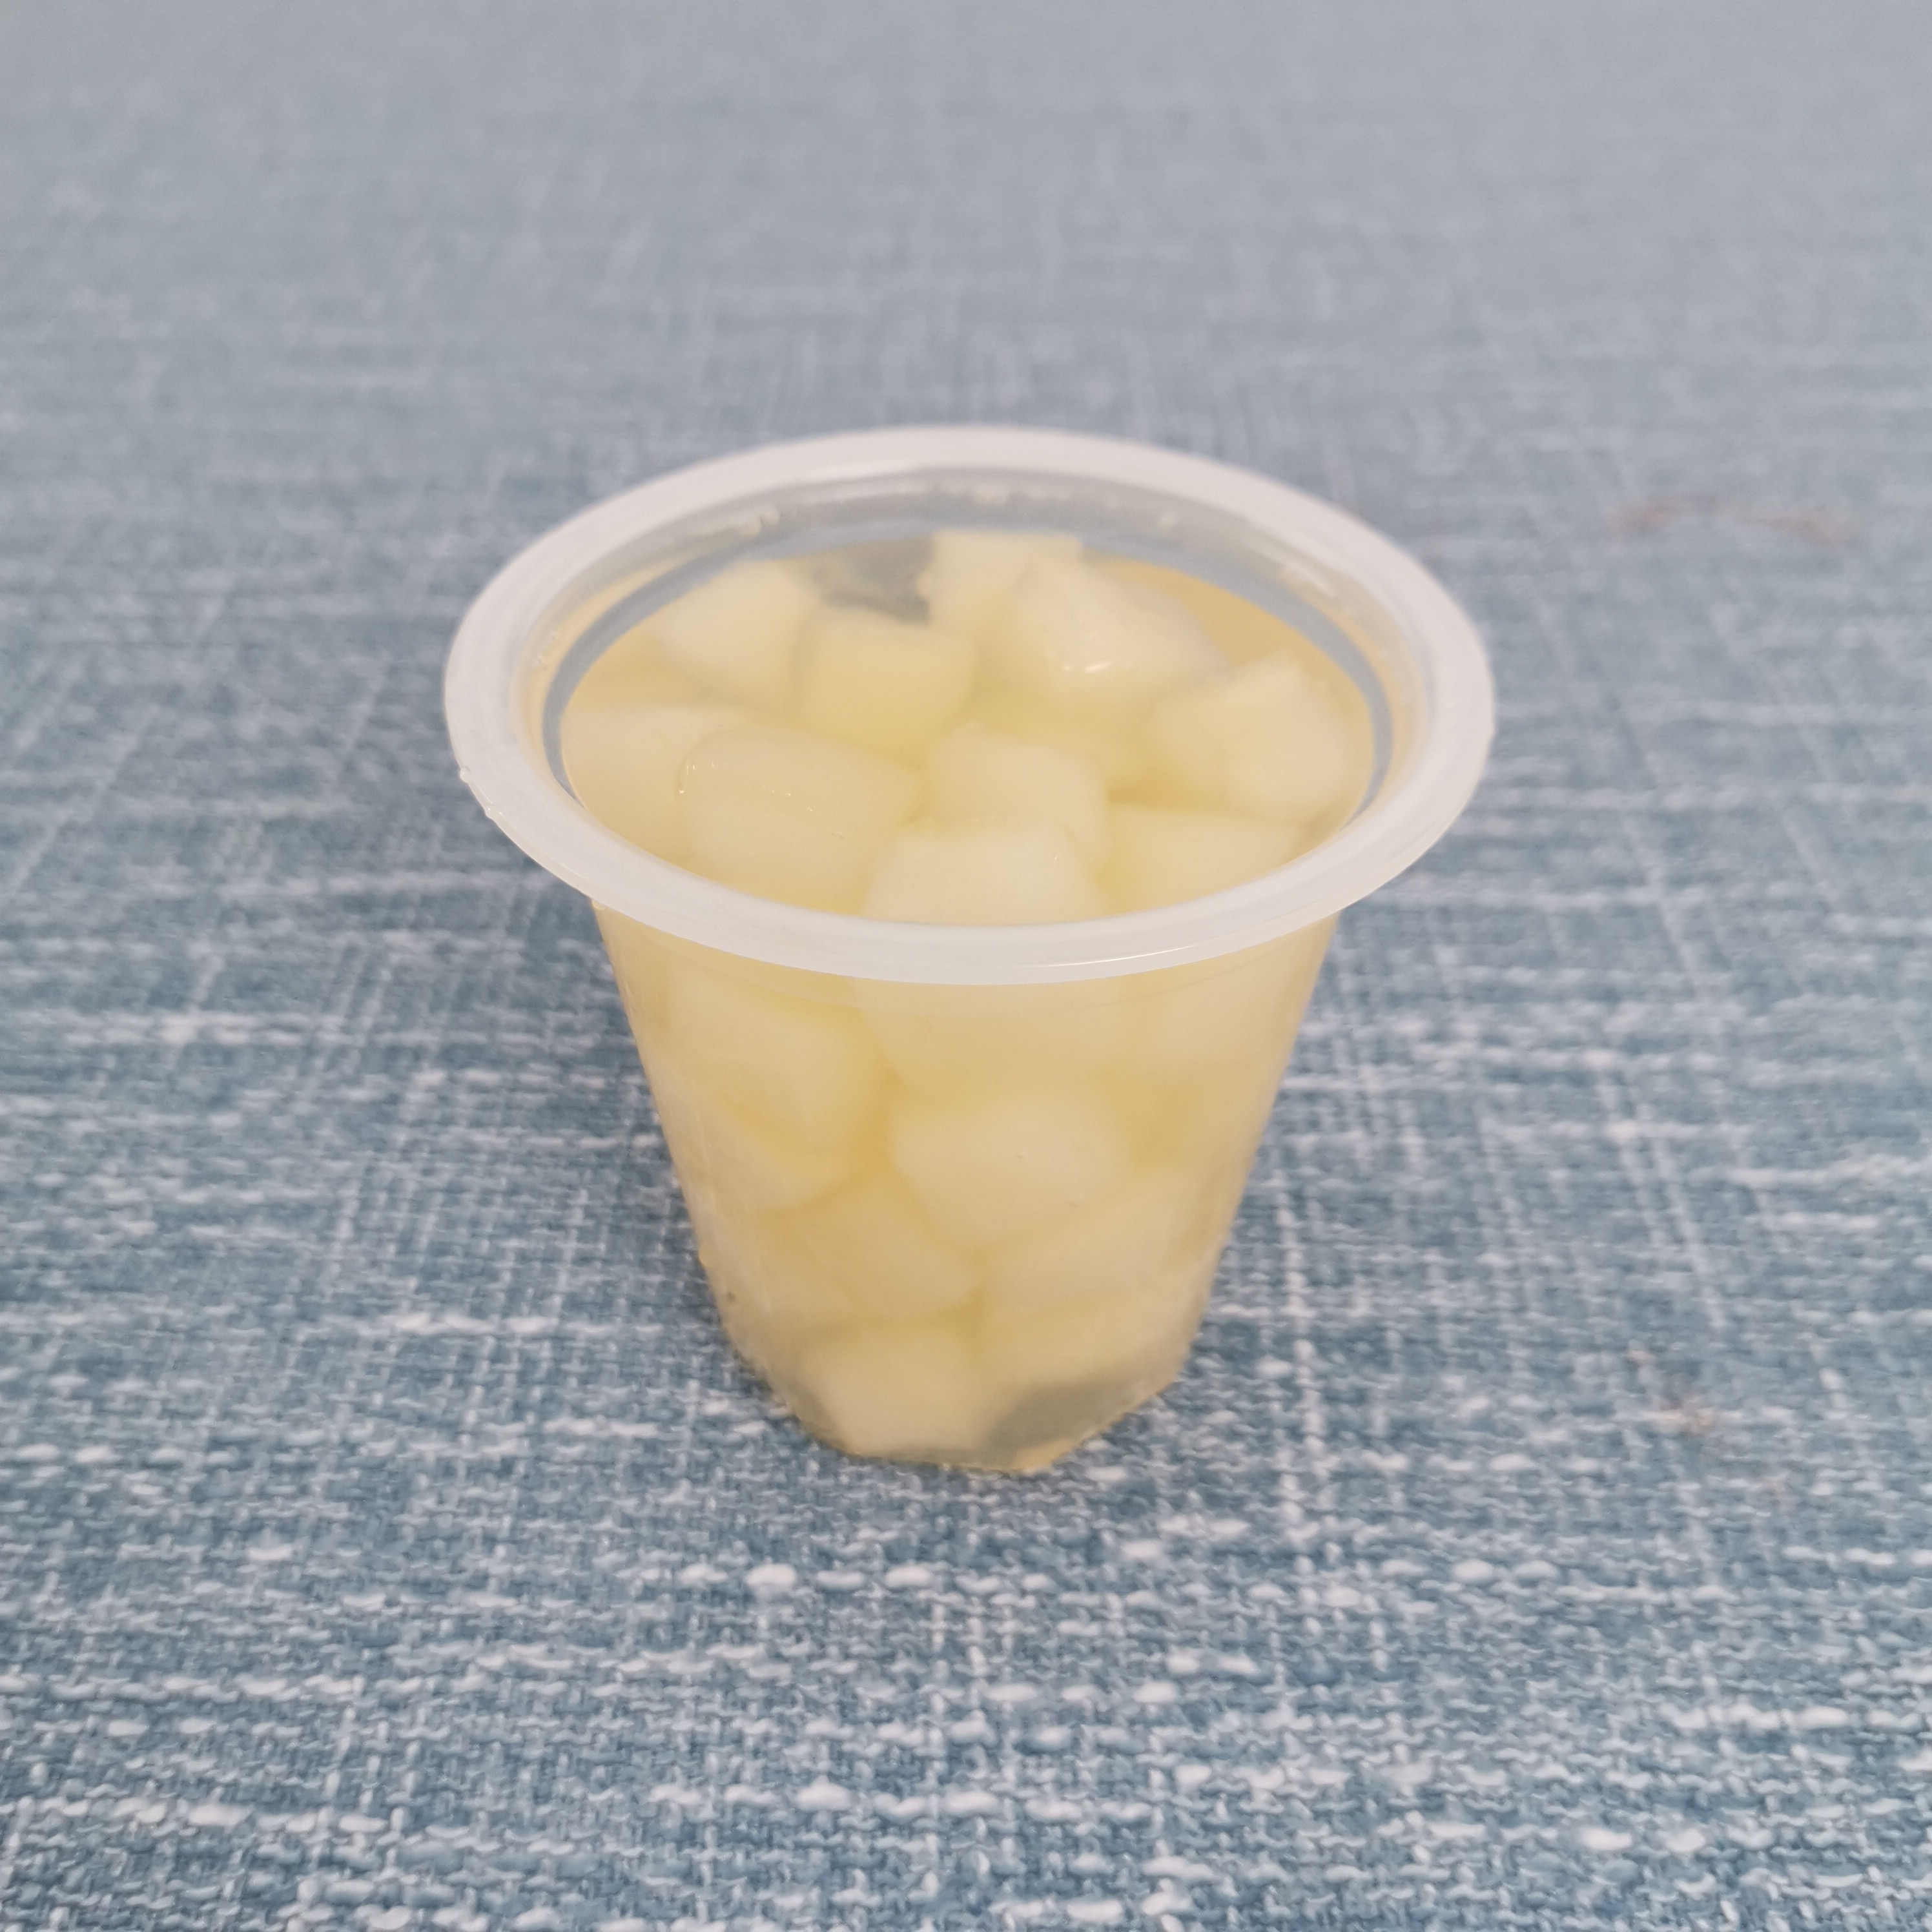 Canned Pears In Pear Juice From Concentrate